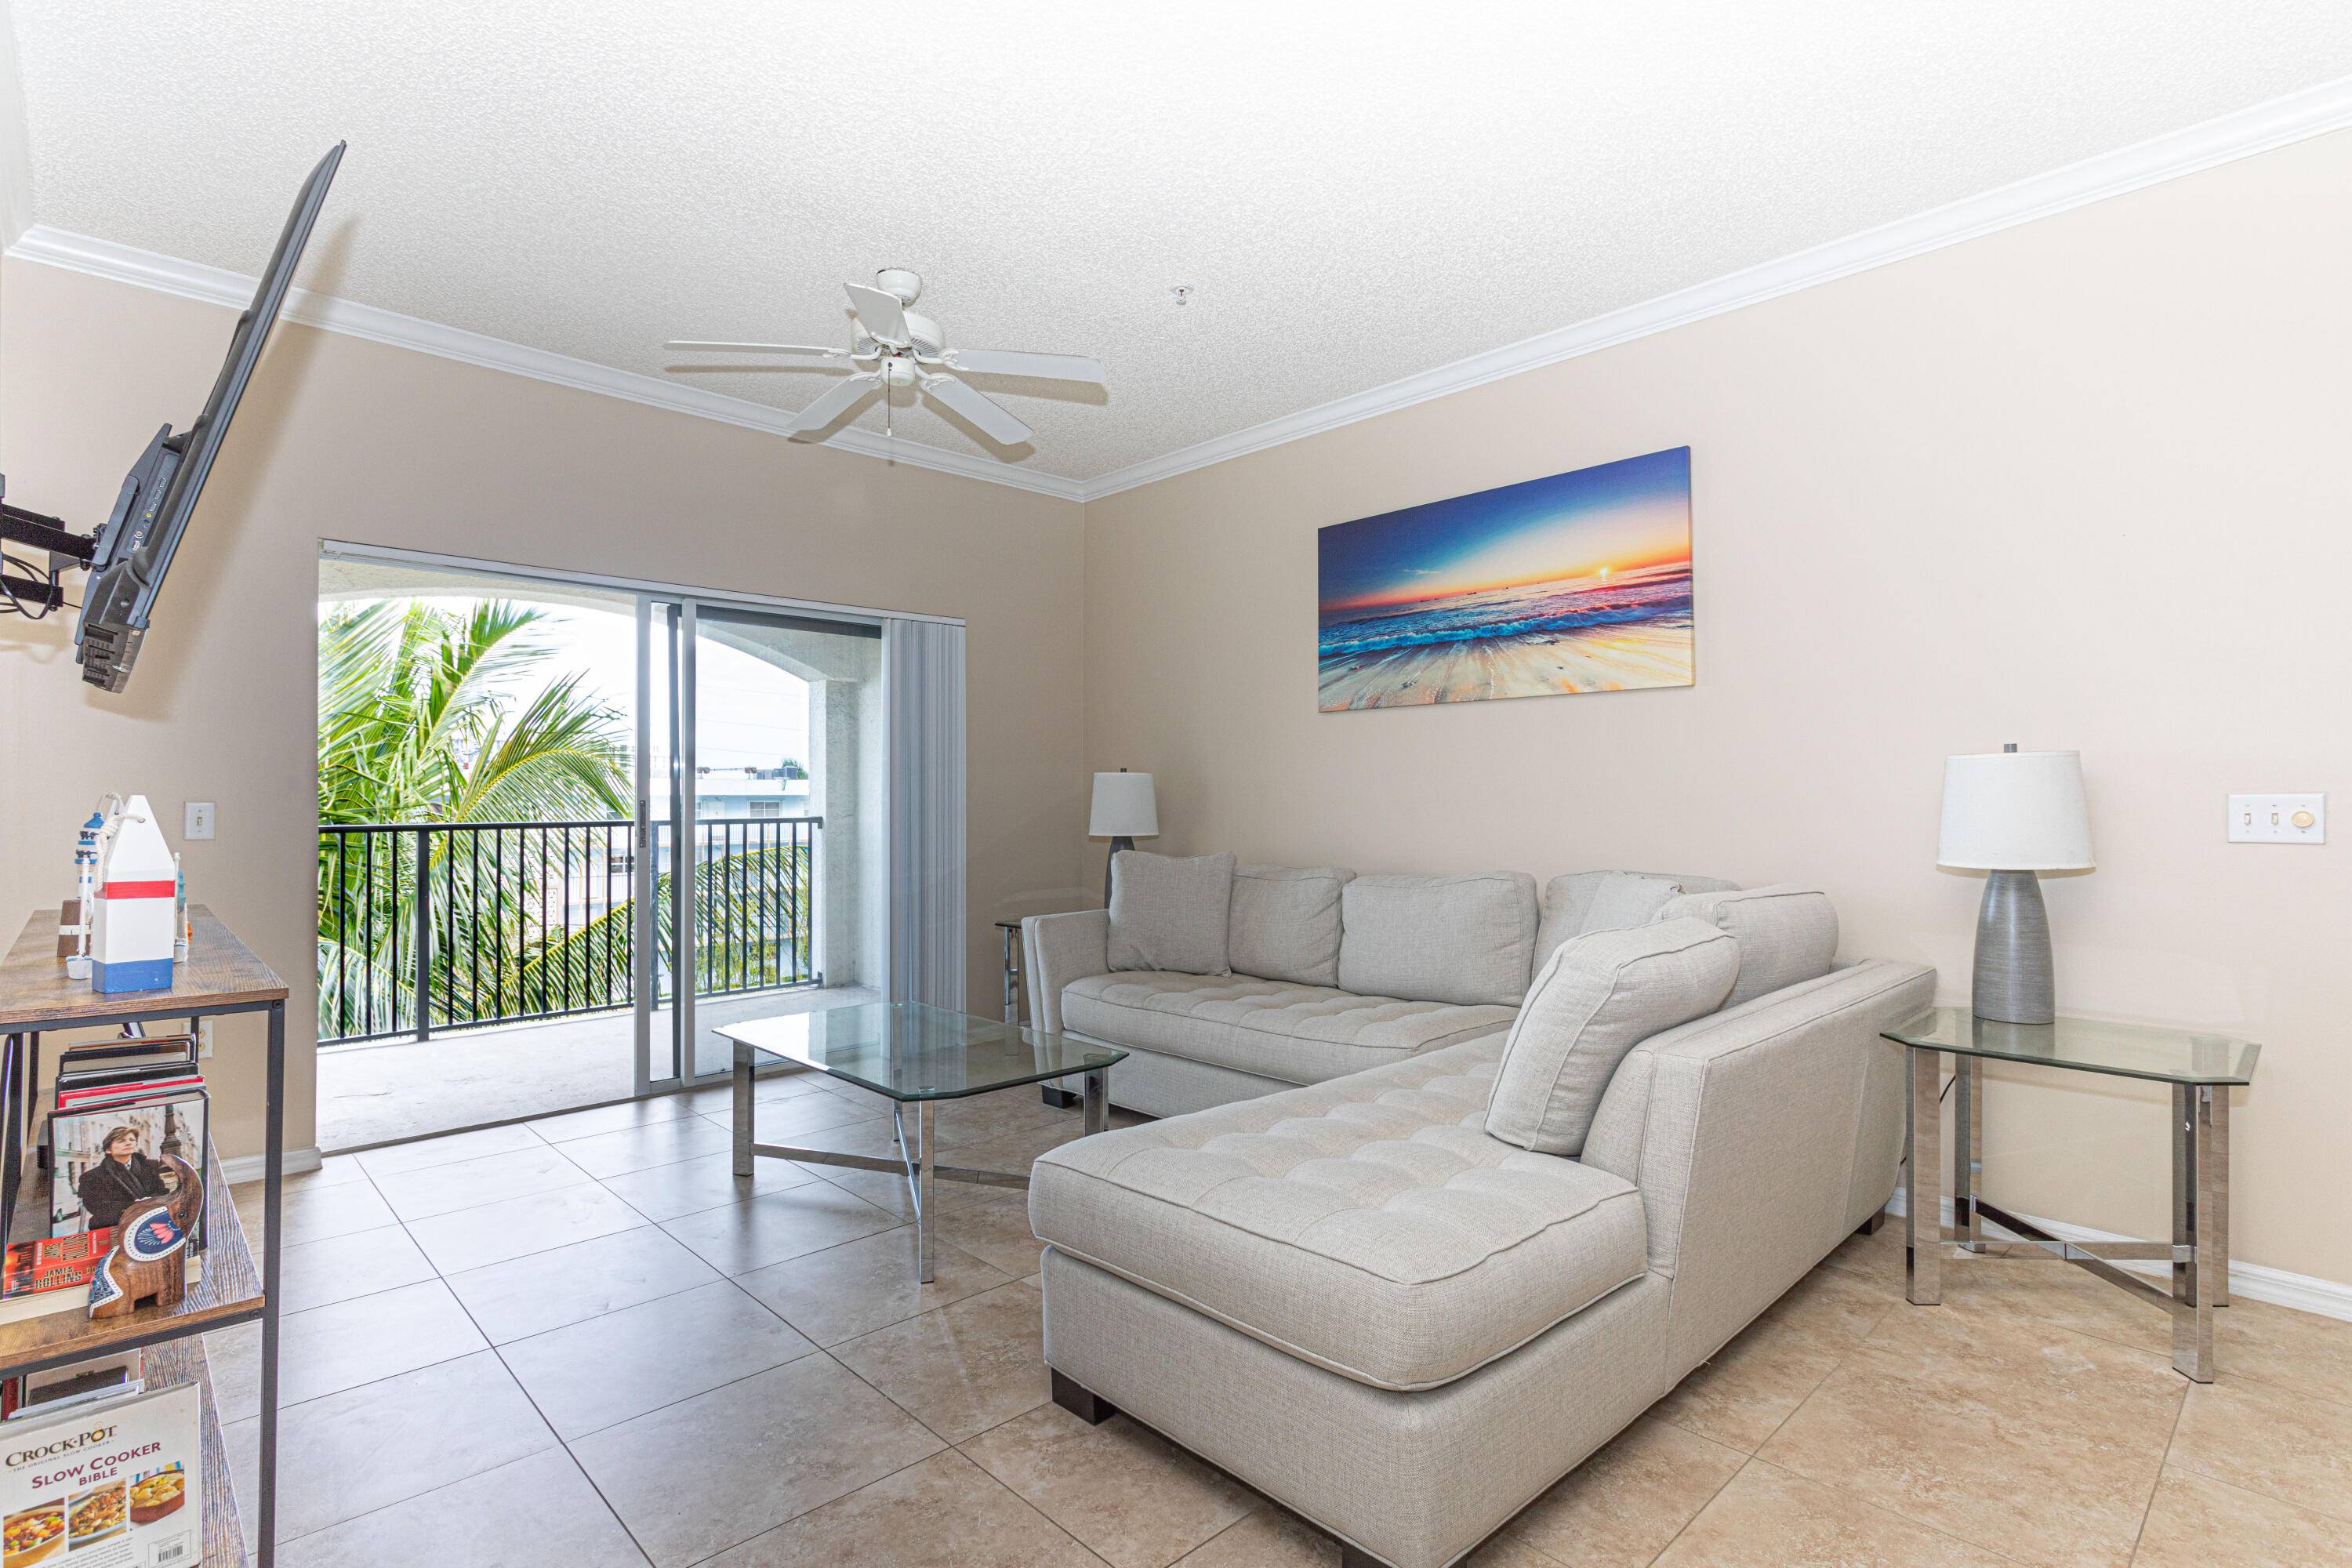 Discover resort style living in this Top Floor, 2 Bedroom 2 bathroom Condo located in the highly sought after community of Tuscany on the Intracoastal !